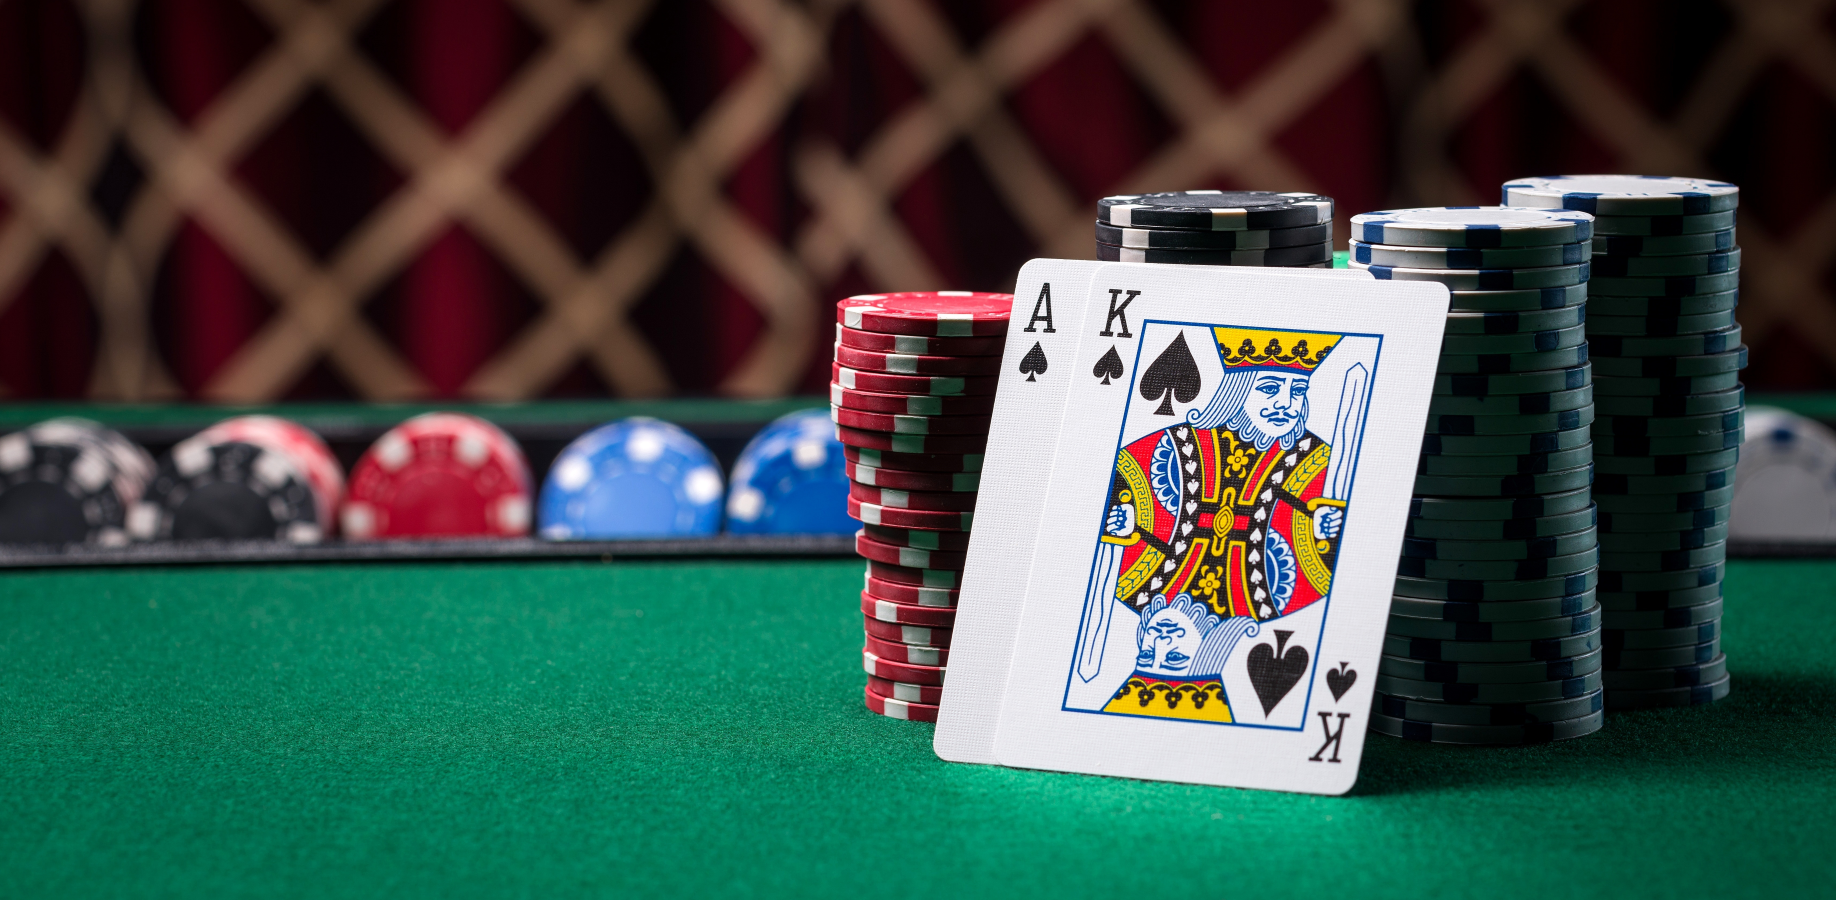 Online casino games are available from the comfort of your home